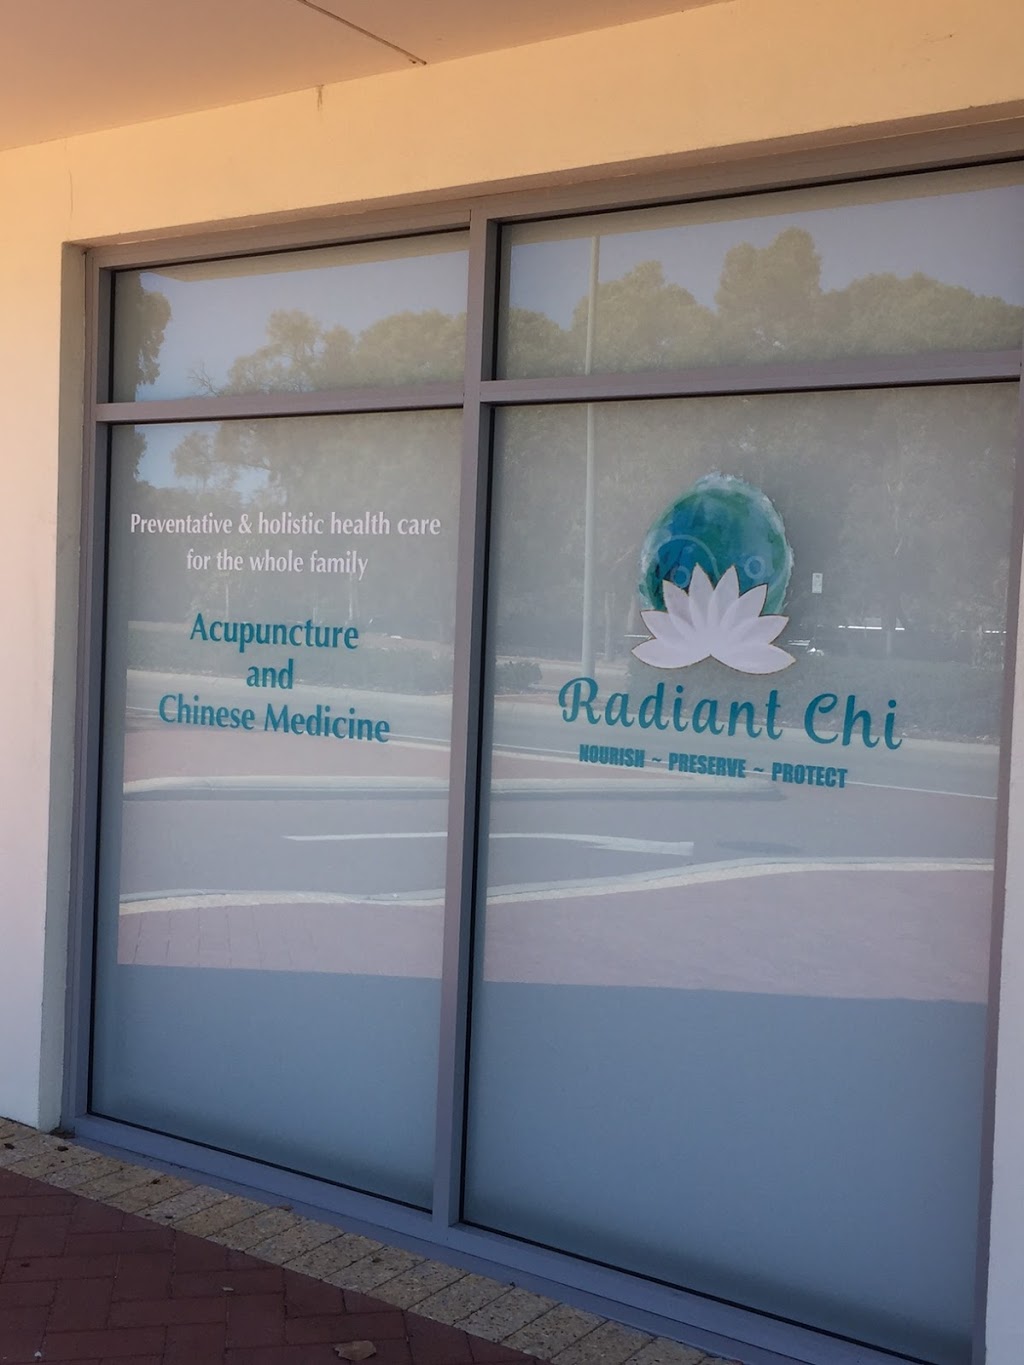 Radiant Chi - Acupuncture, Cupping, Chinese Medicine | health | 8/71 Winton Rd, Joondalup WA 6027, Australia | 0862047211 OR +61 8 6204 7211